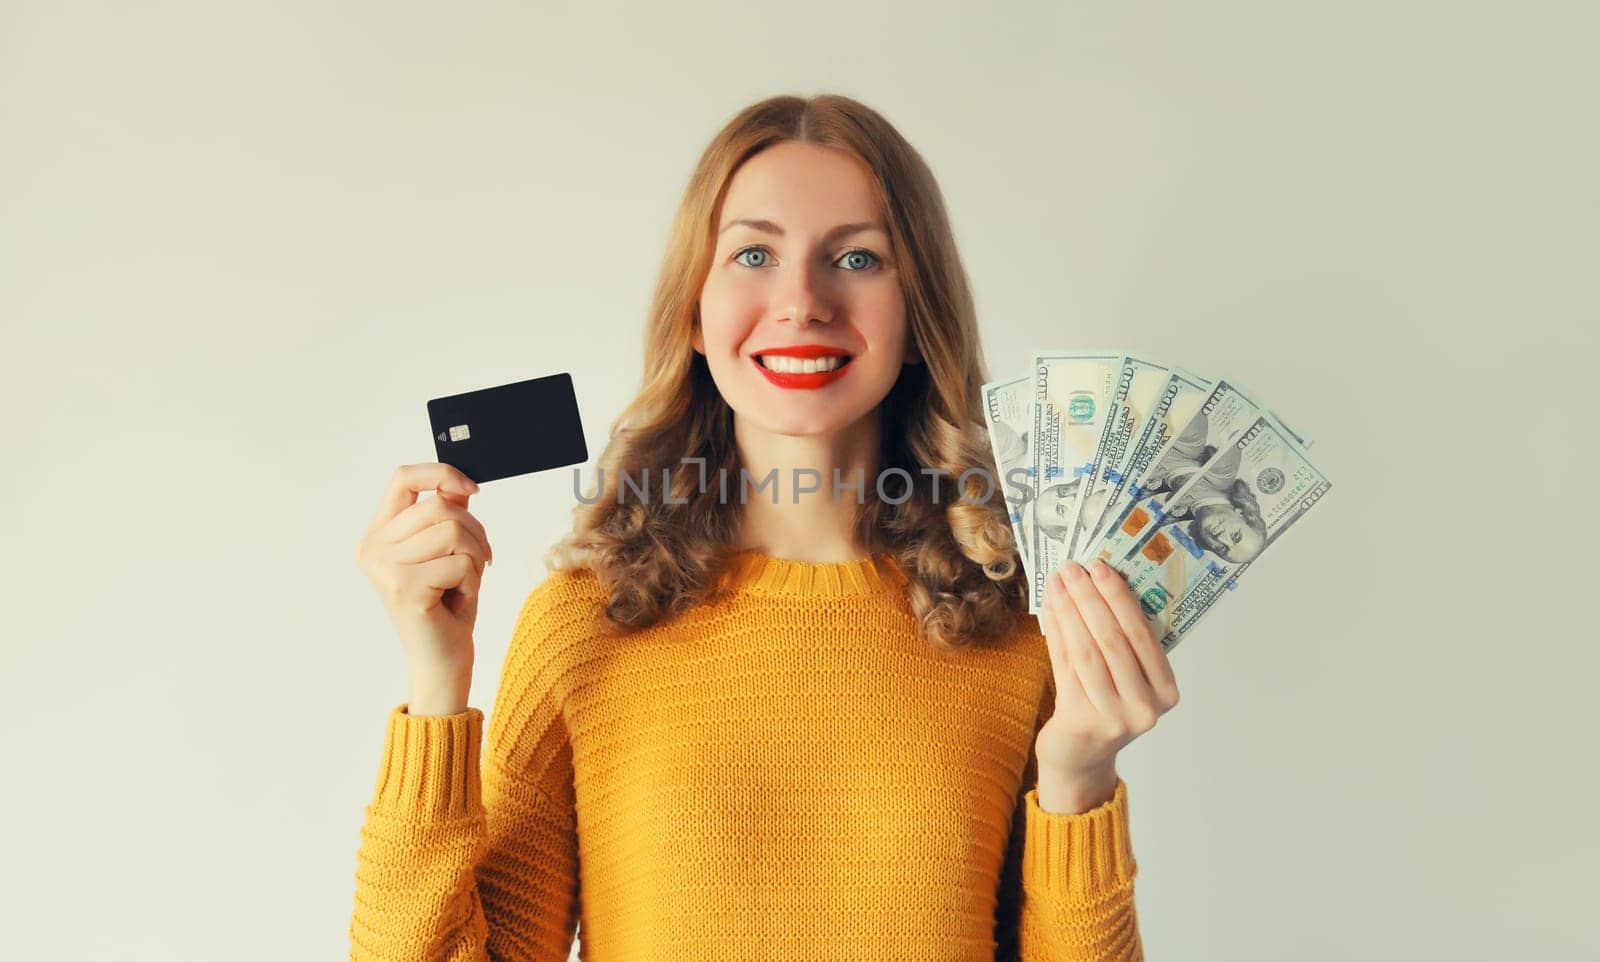 Portrait of happy smiling young woman holding plastic credit bank card and cash money in dollar bills